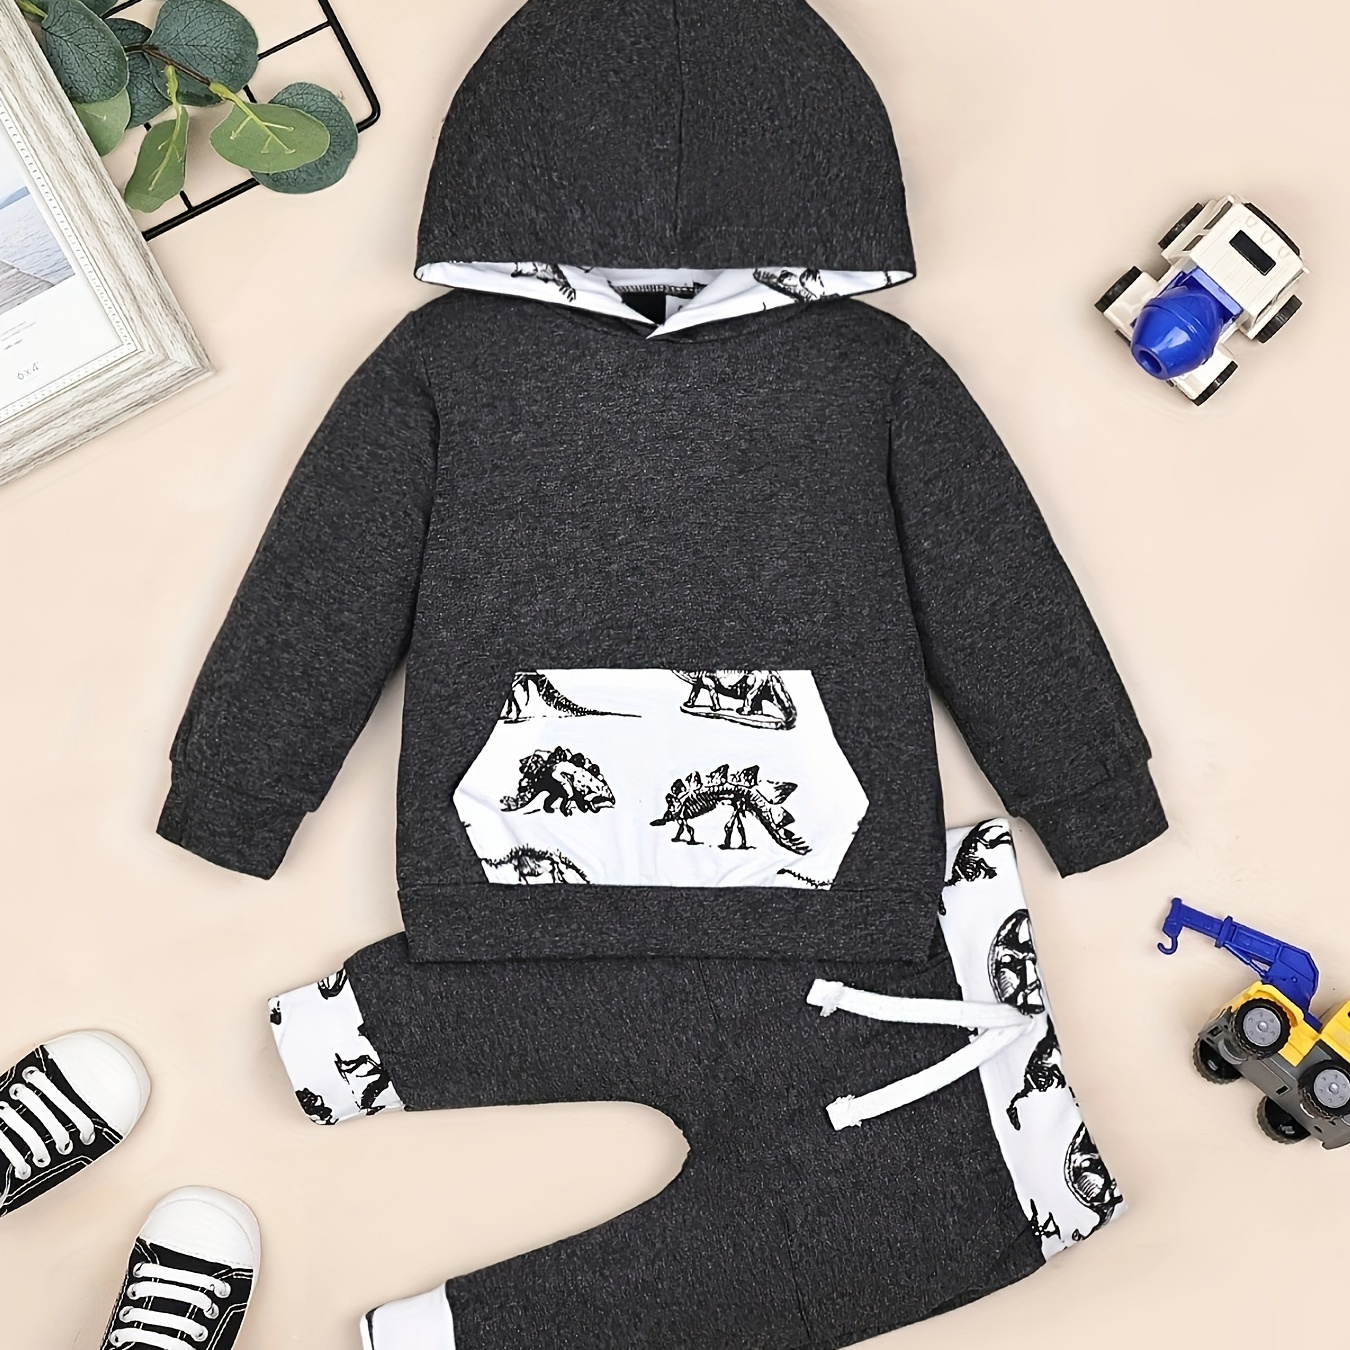 

Baby Boy Cotton Outfit - Long Sleeve Sweatshirt Hoodie Plaid Pants 2pcs Set For 3 Months - 3 Years Old Kids